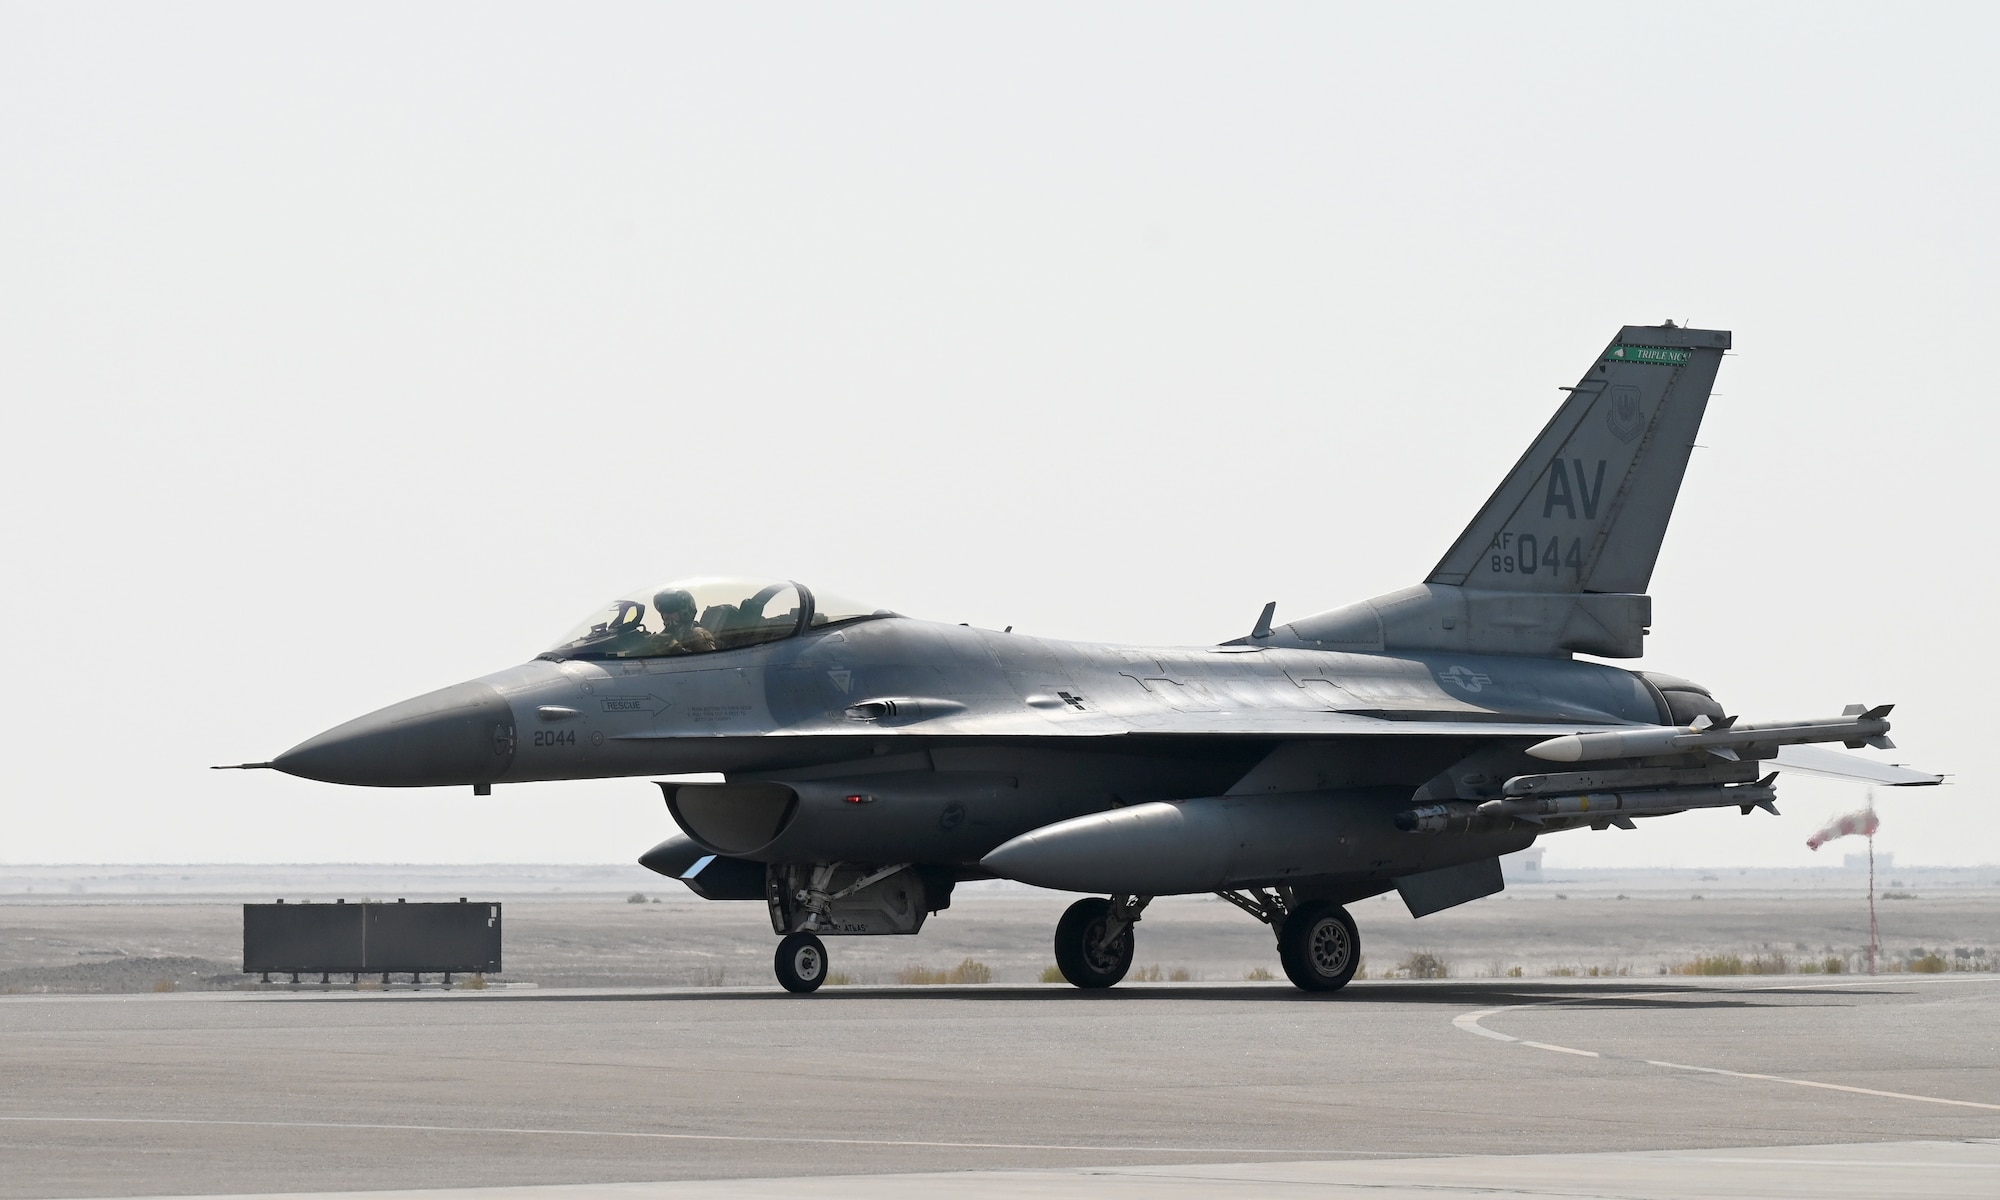 A photo of a jet taxiing on a flightline.